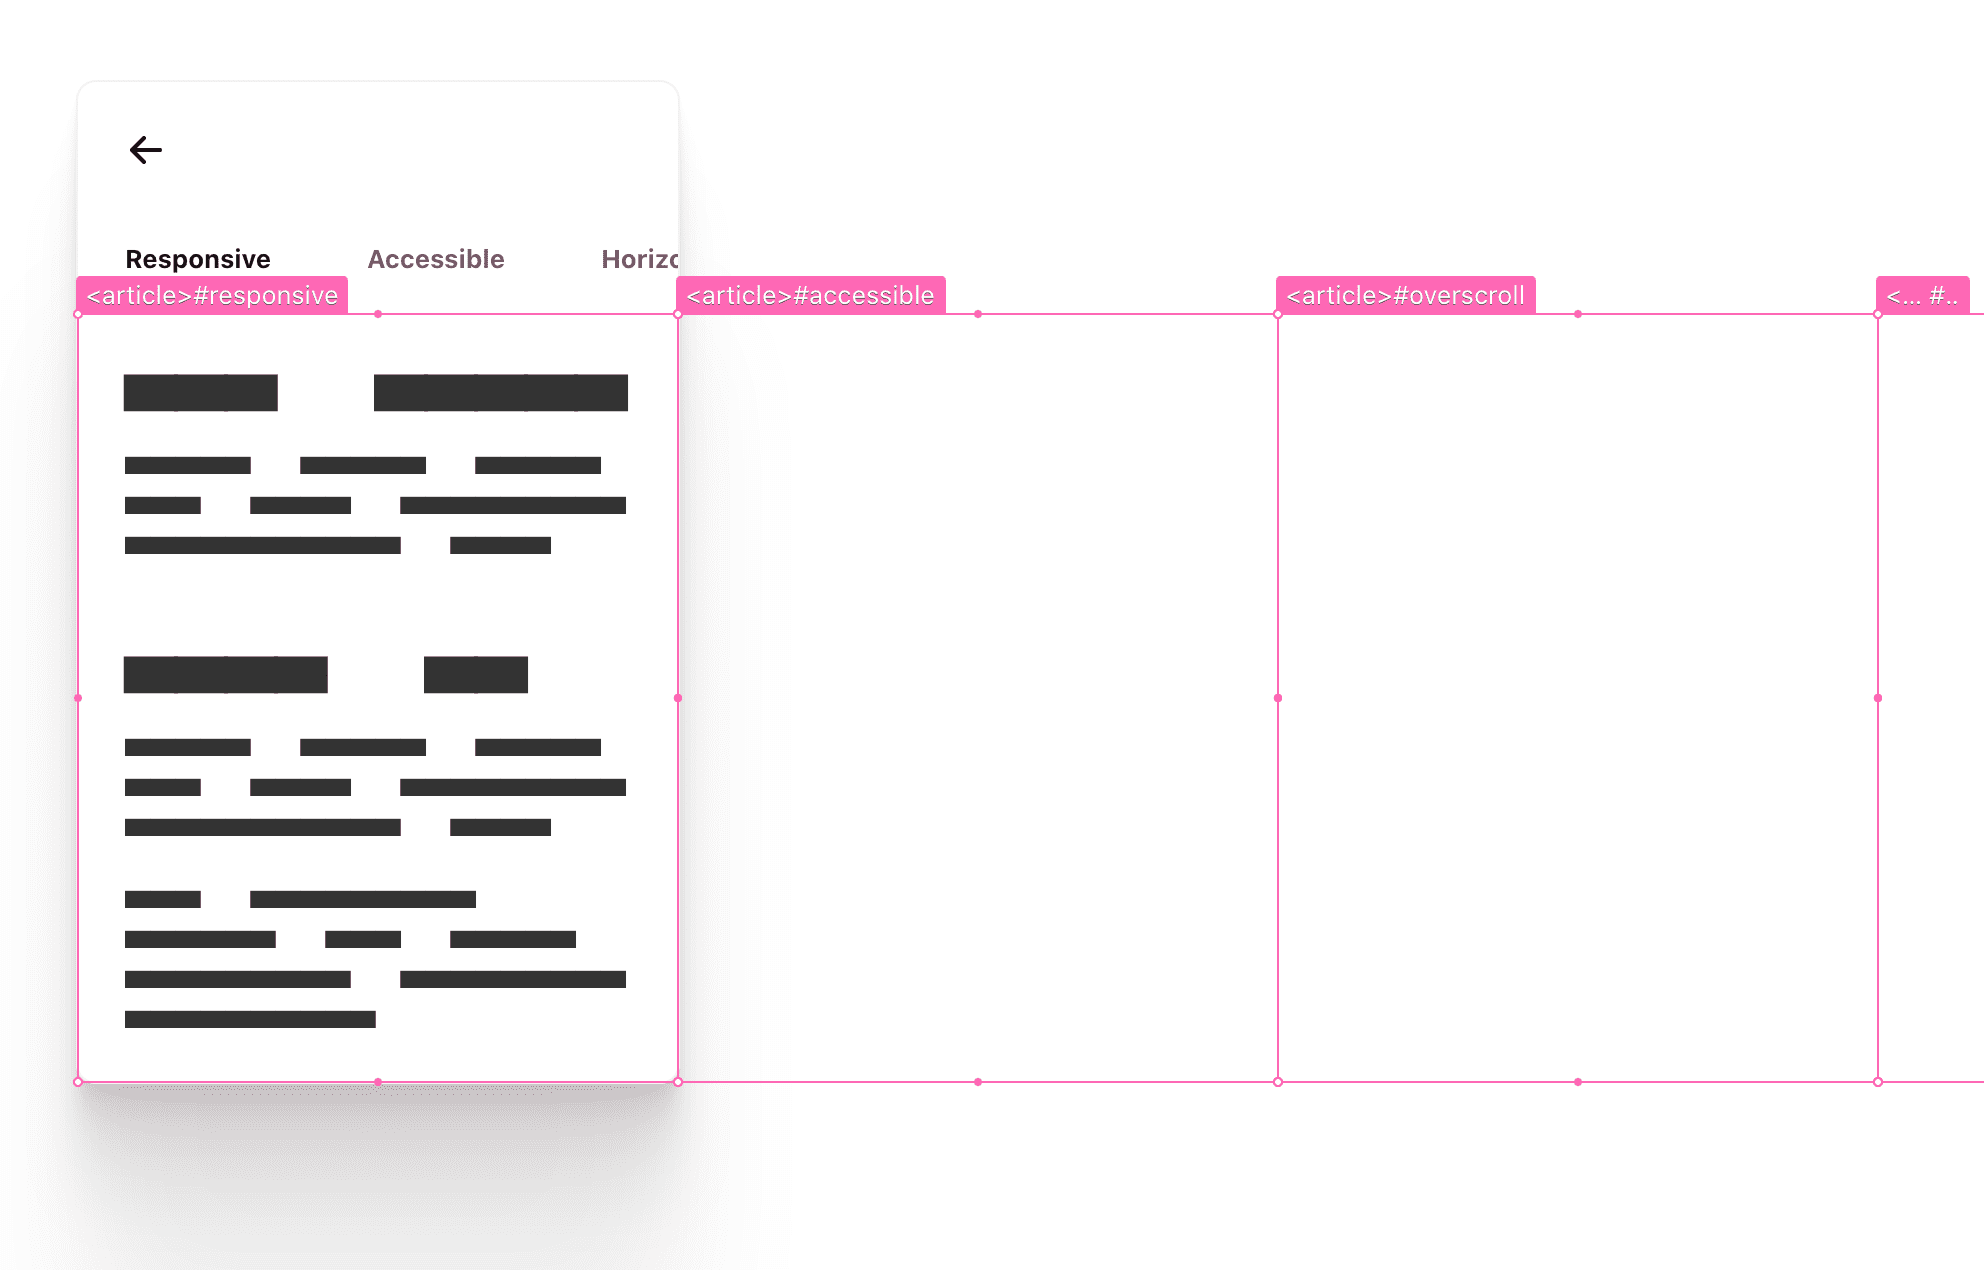 the article elements have hotpink overlays on them, outlining the space they take up in the component and where they overflow